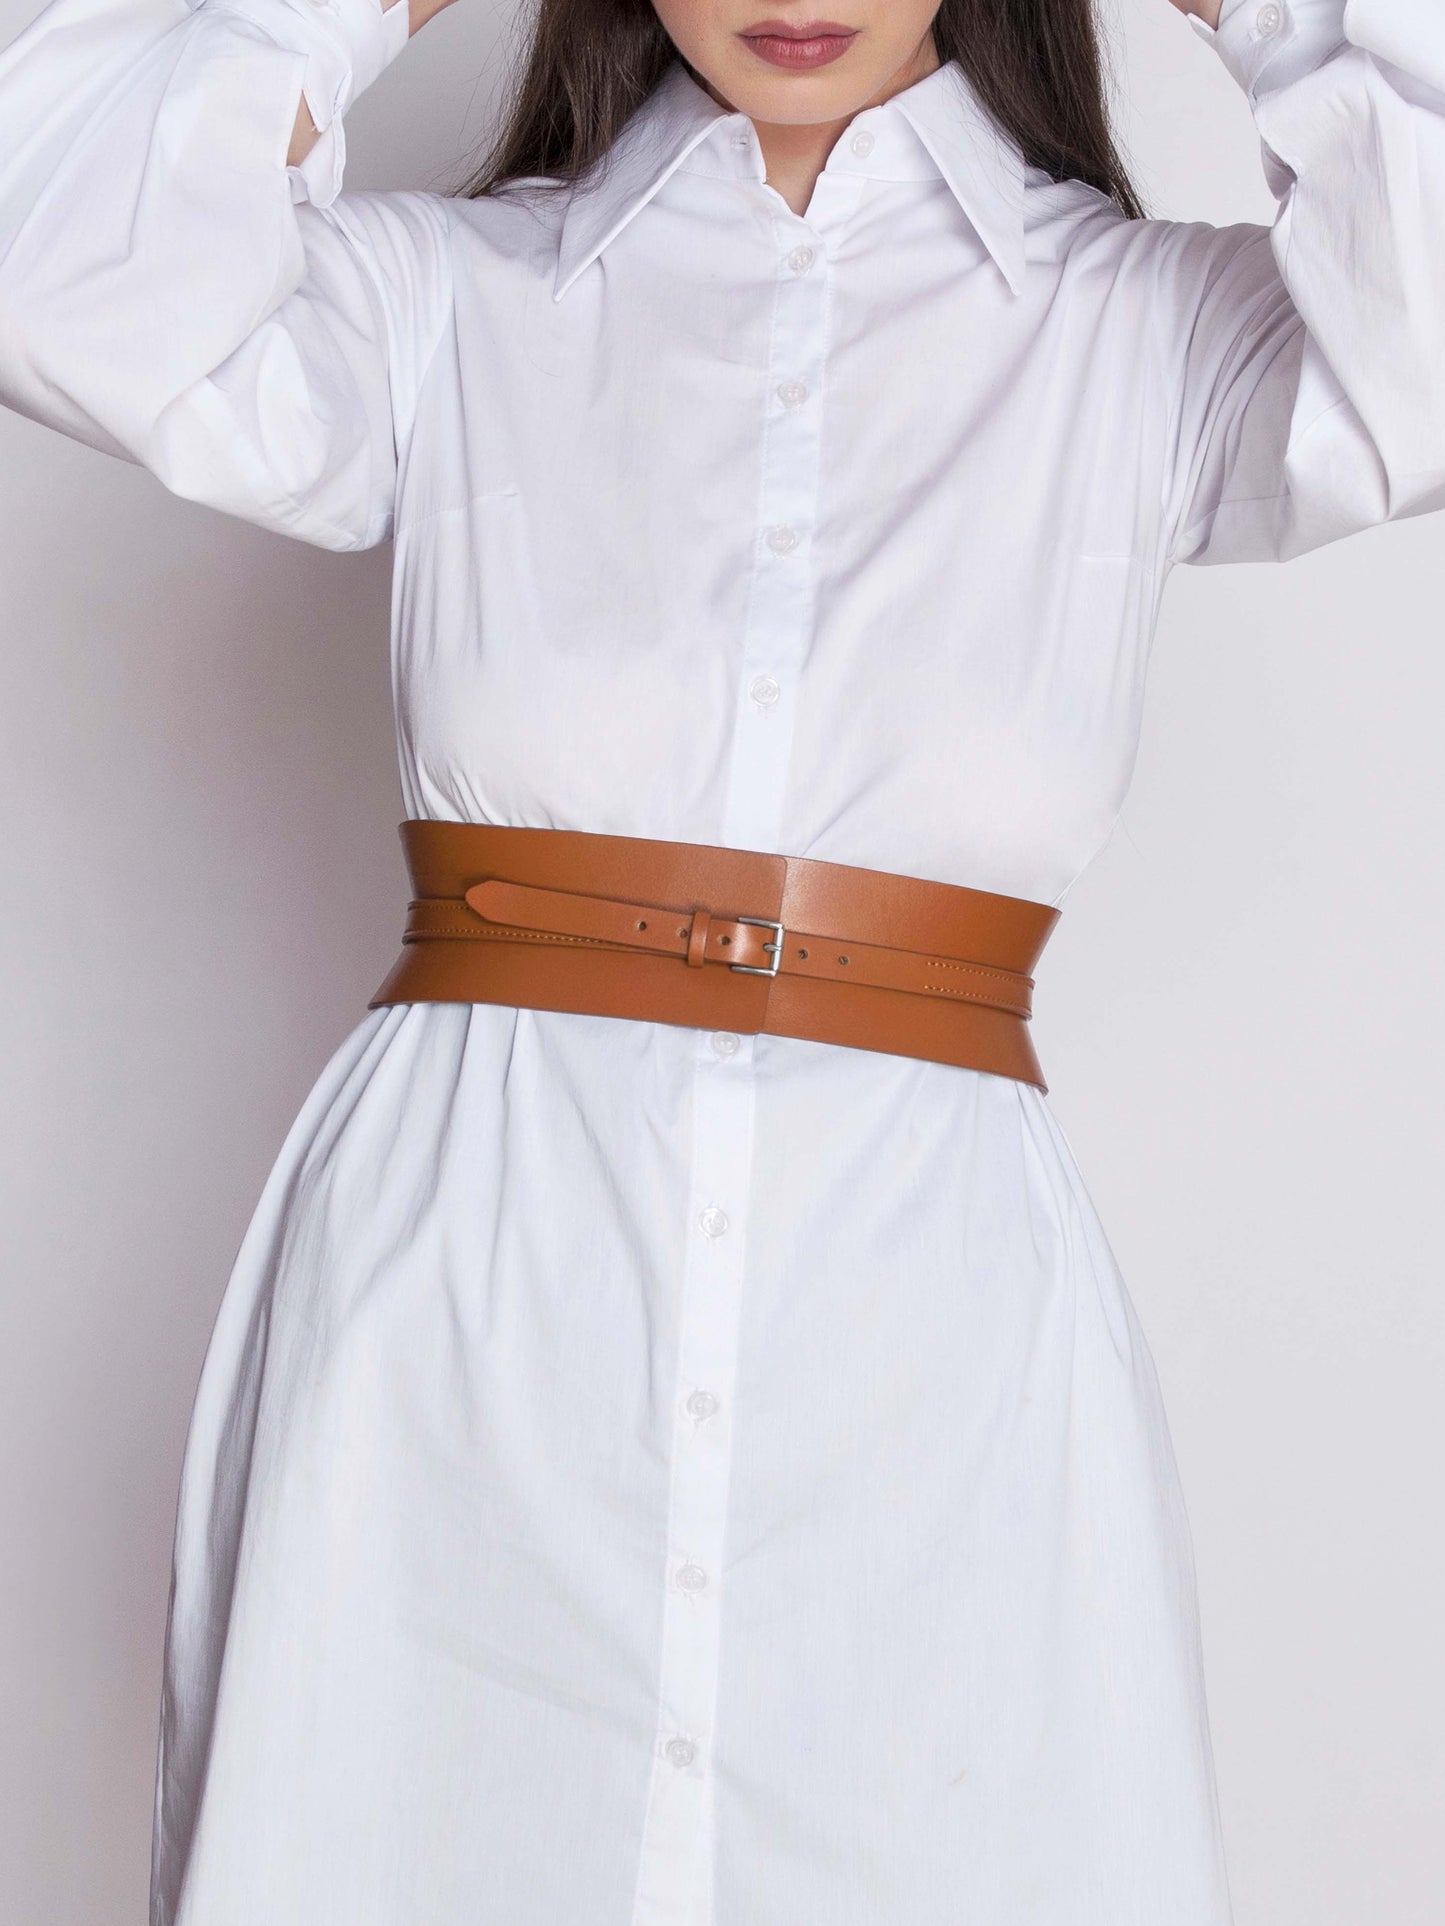 Brown leather corset belt fitted on woman wearing white shirt dress.